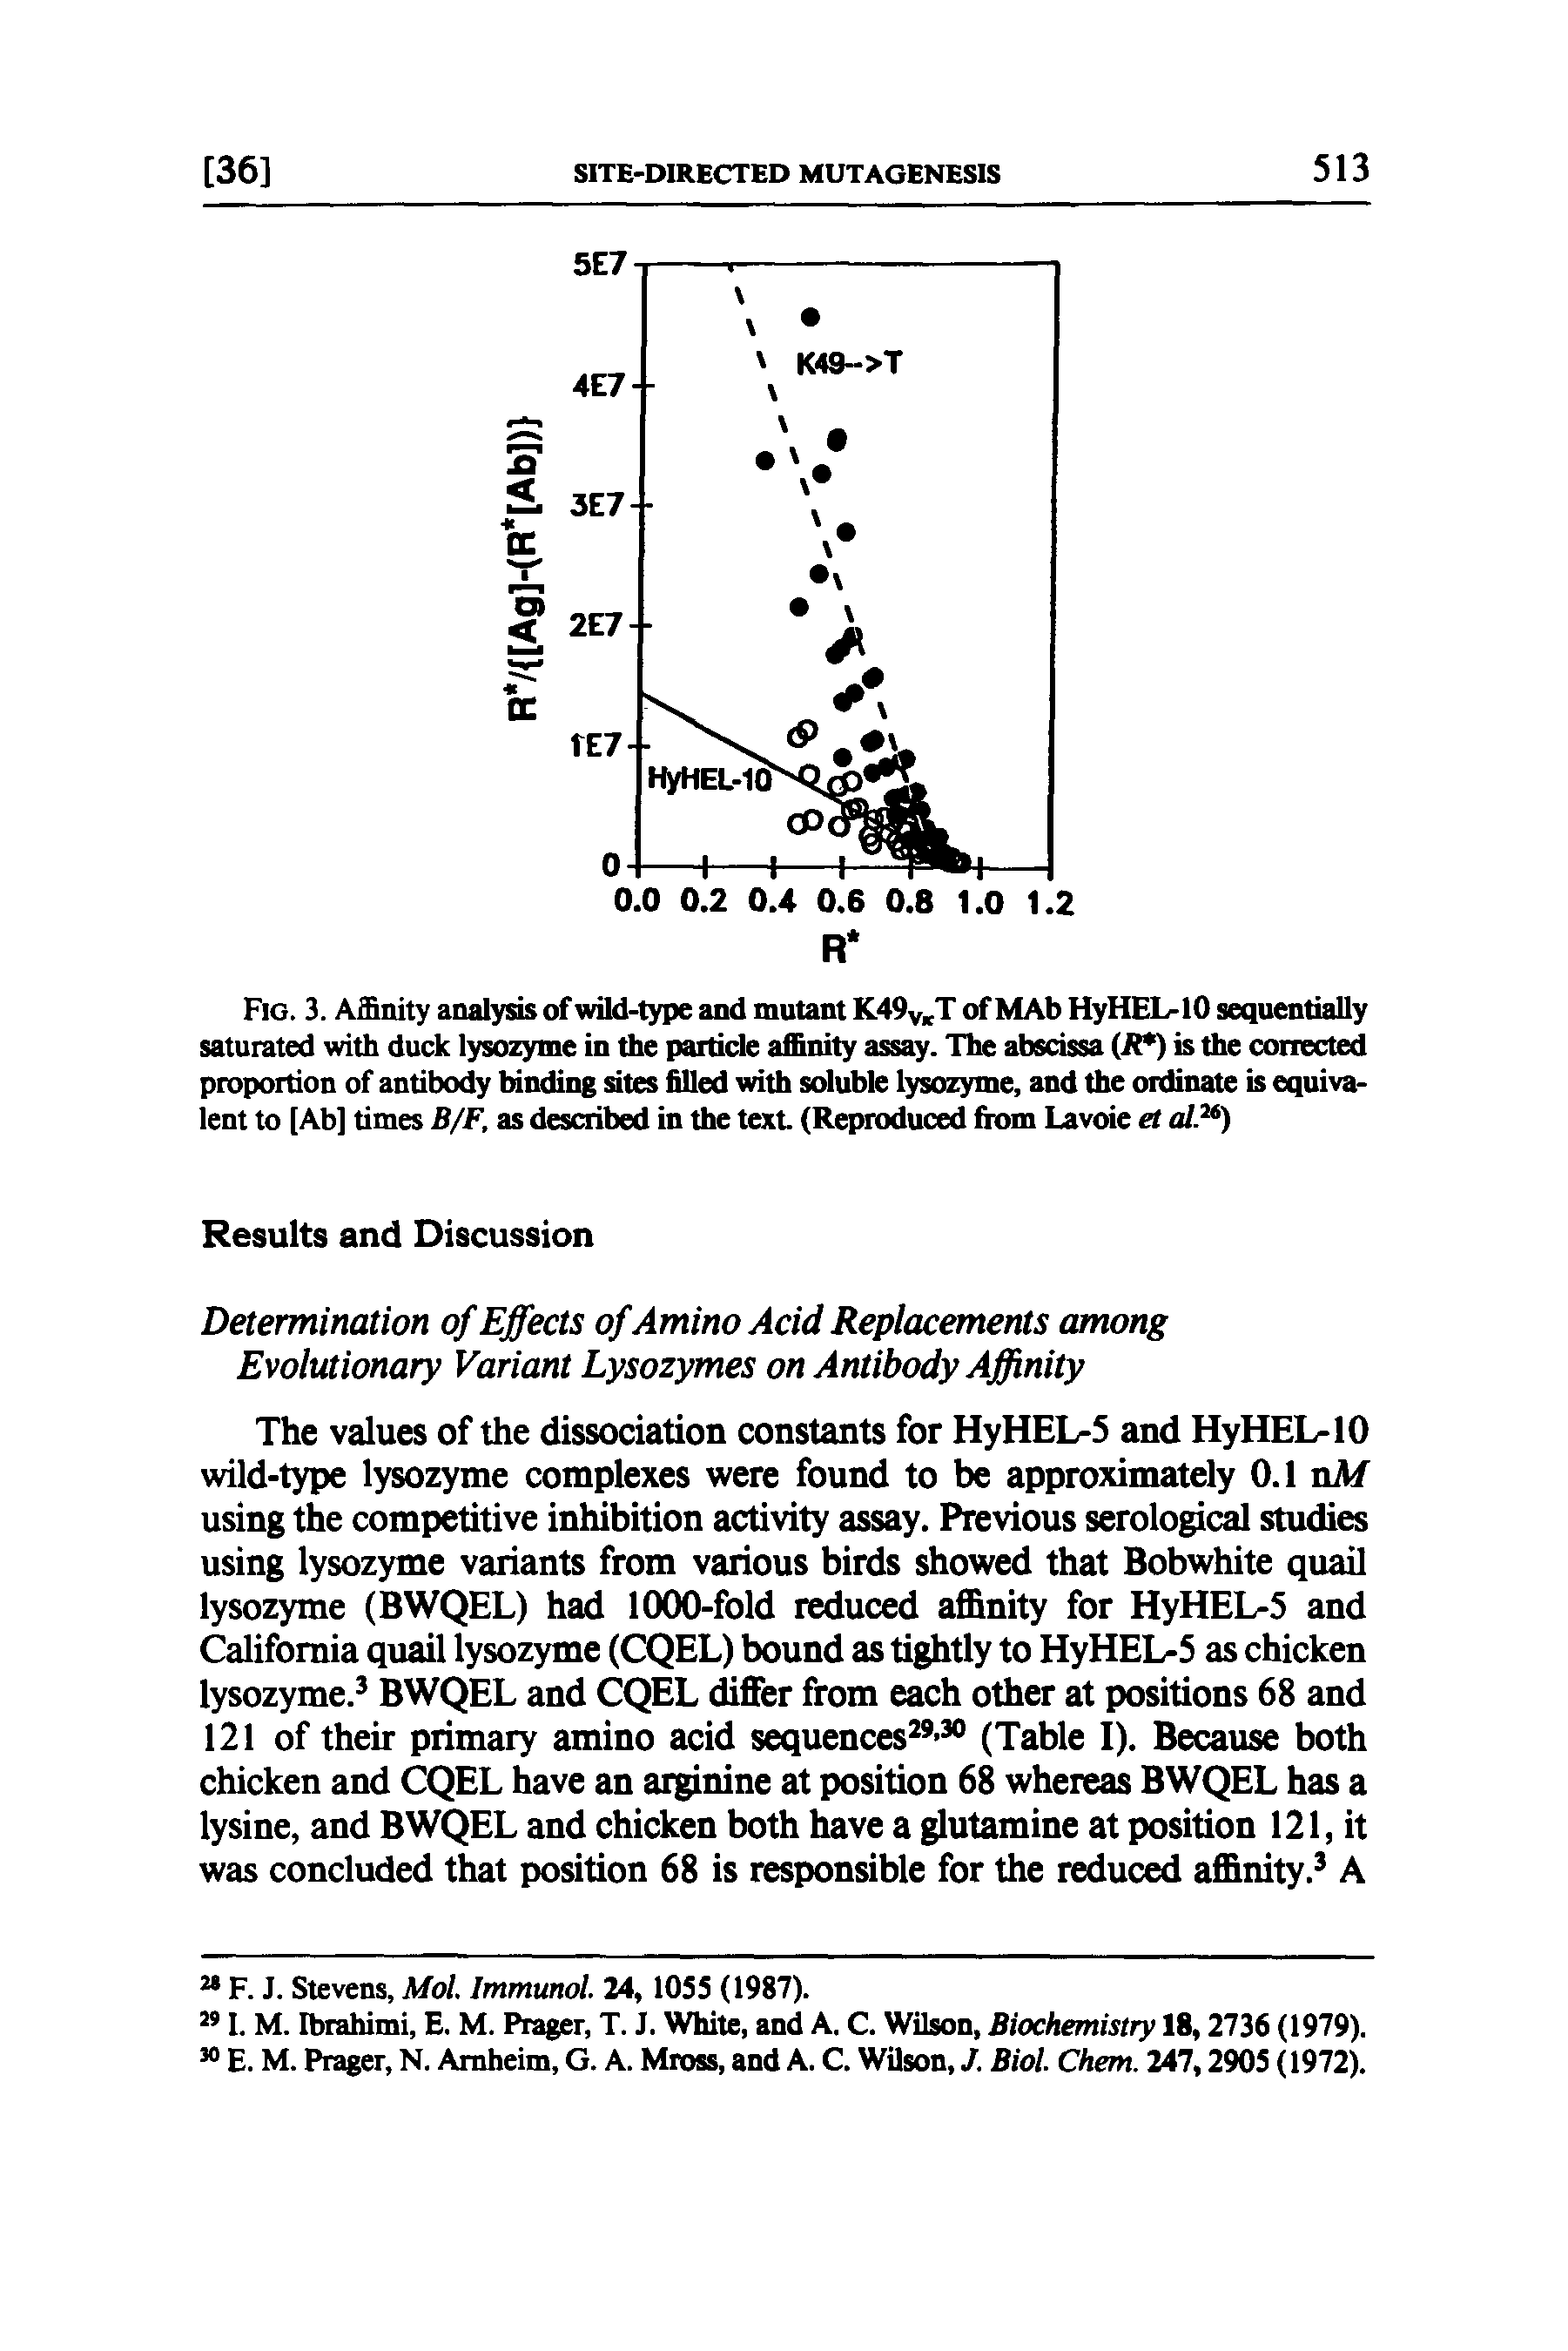 Fig. 3. Affinity analysis of wild-type and mutant K49VlcT of MAb HyHEHO sequentially saturated with duck lysozyme in the particle affinity assay. The abscissa (R ) is the corrected proportion of antibody binding sites filled with soluble lysozyme, and the ordinate is equivalent to [Ab] times B/F, as described in the text (Reproduced from Lavoie et al.26)...